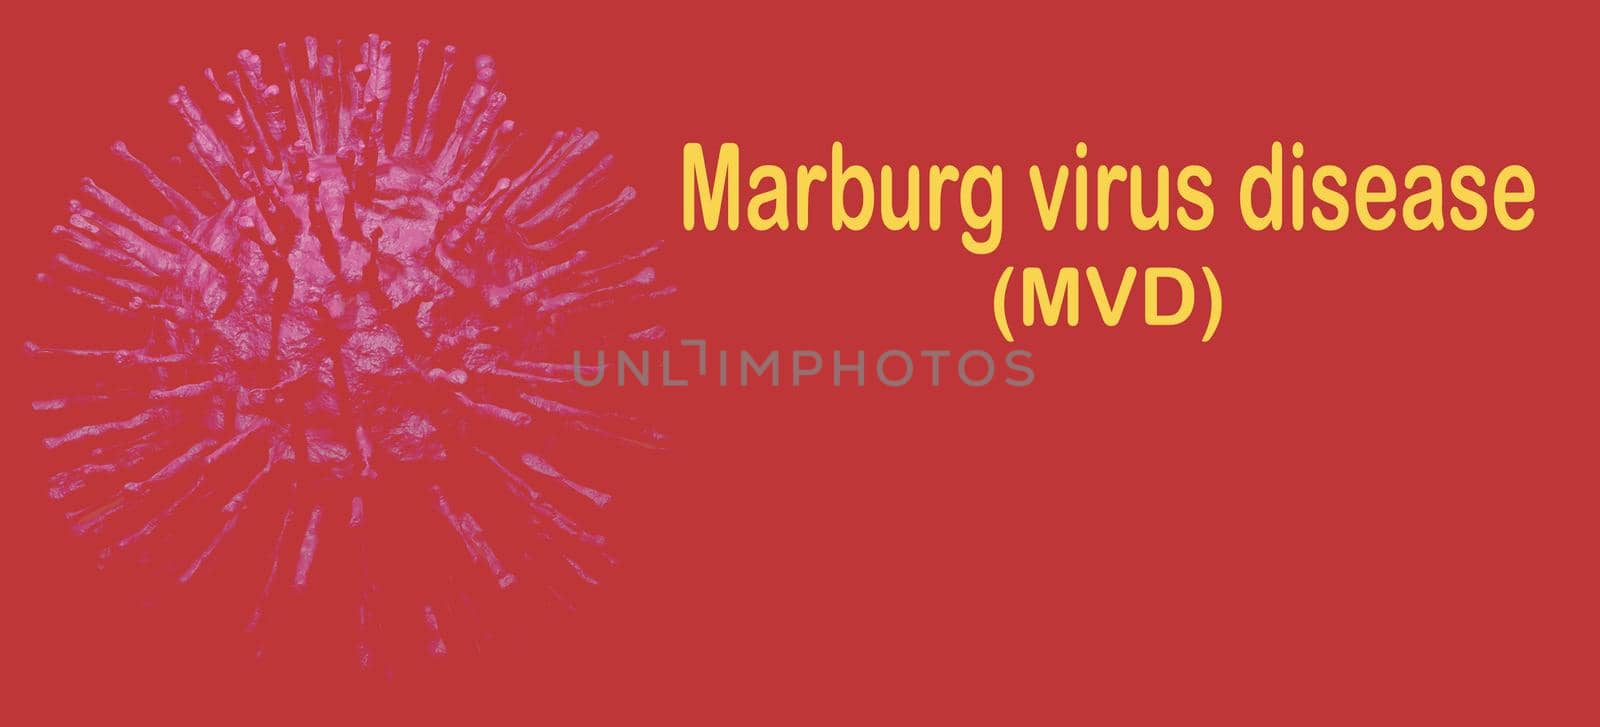 Marburg virus disease. Marburg virus disease (MVD) or Marburg haemorrhagic fever outbreak concept. Virus causes severe viral haemorrhagic fever in humans. Fatal illness in humans. Infectious disease. by Fahroni